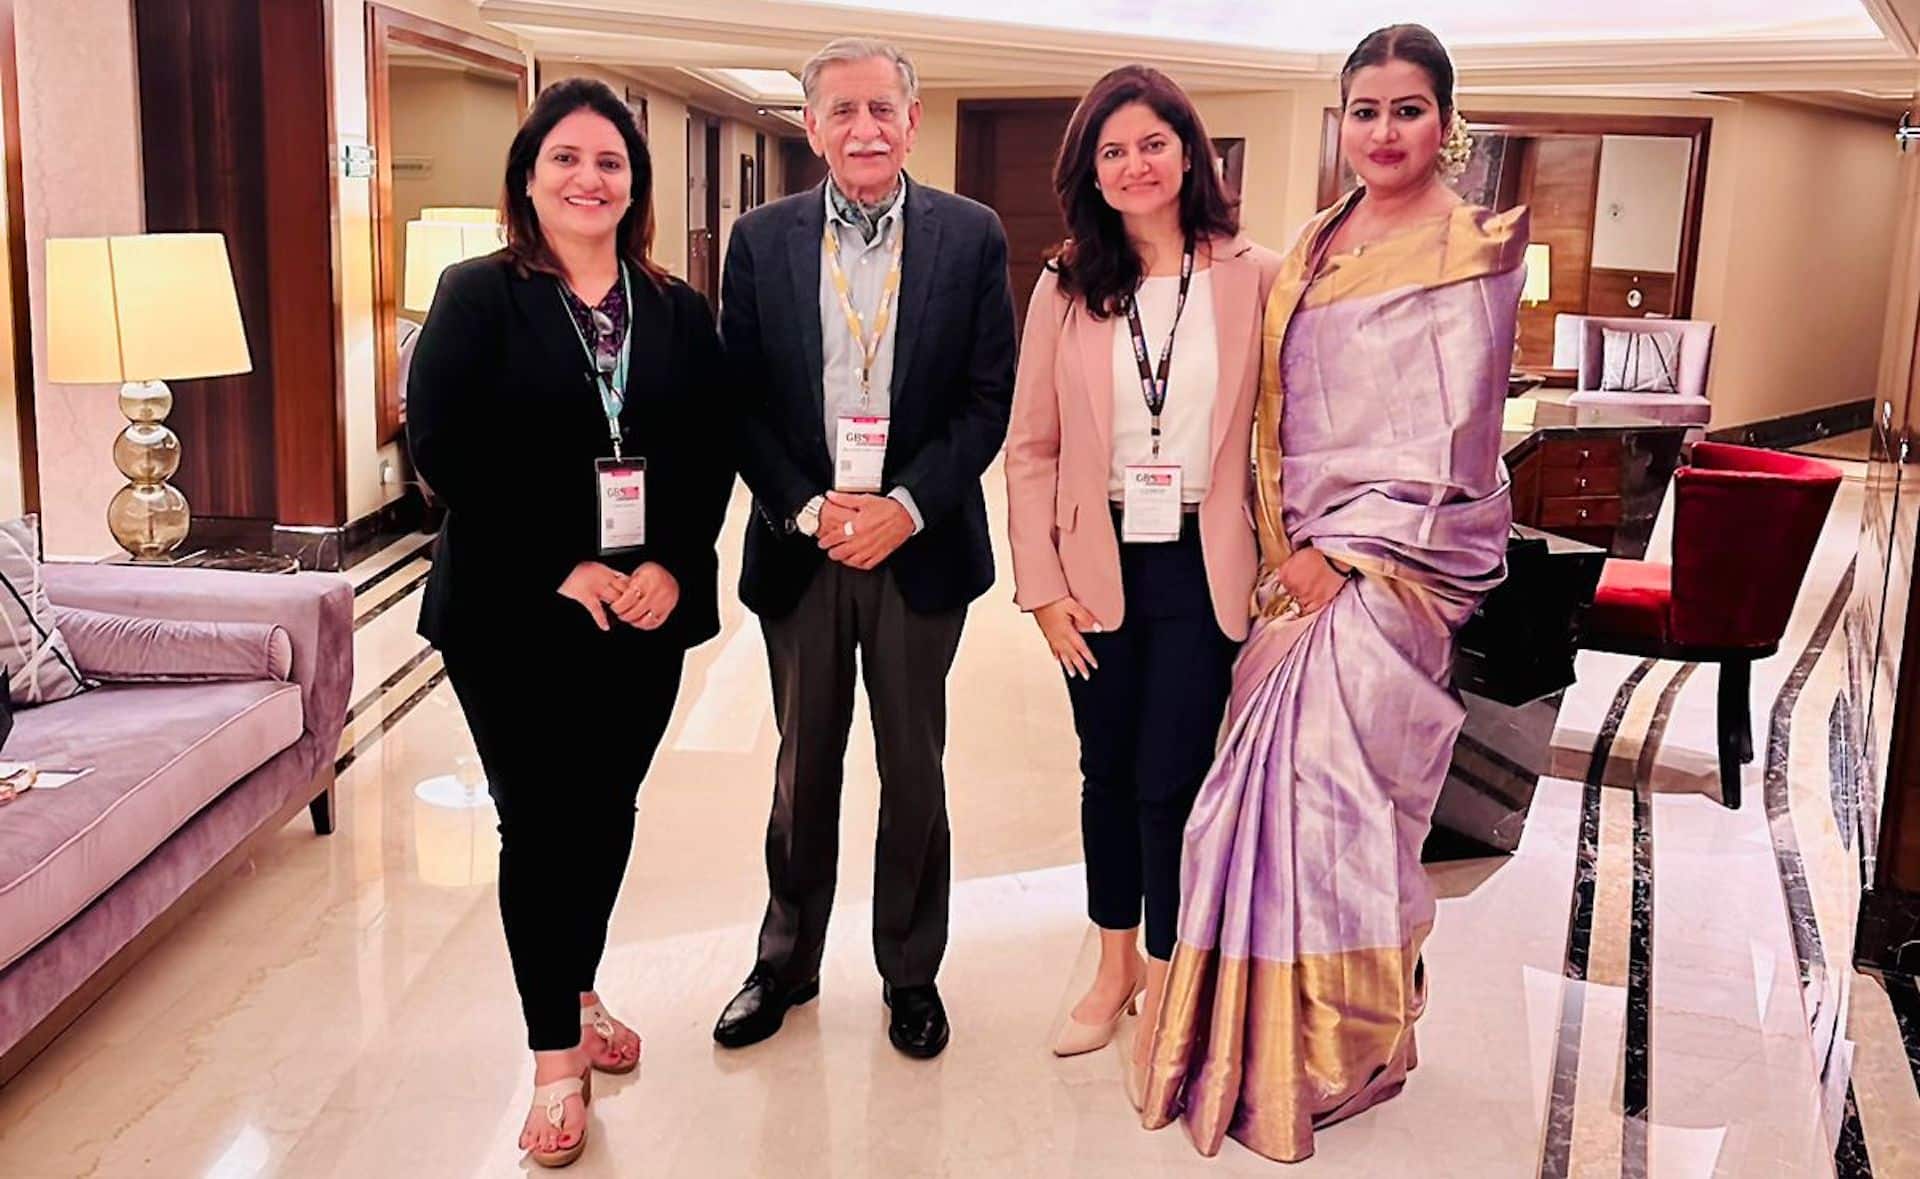 Philanthropist And Industrialist Sudha Reddy Spearheads Leadership Panel Discussion at the Global Business Summit